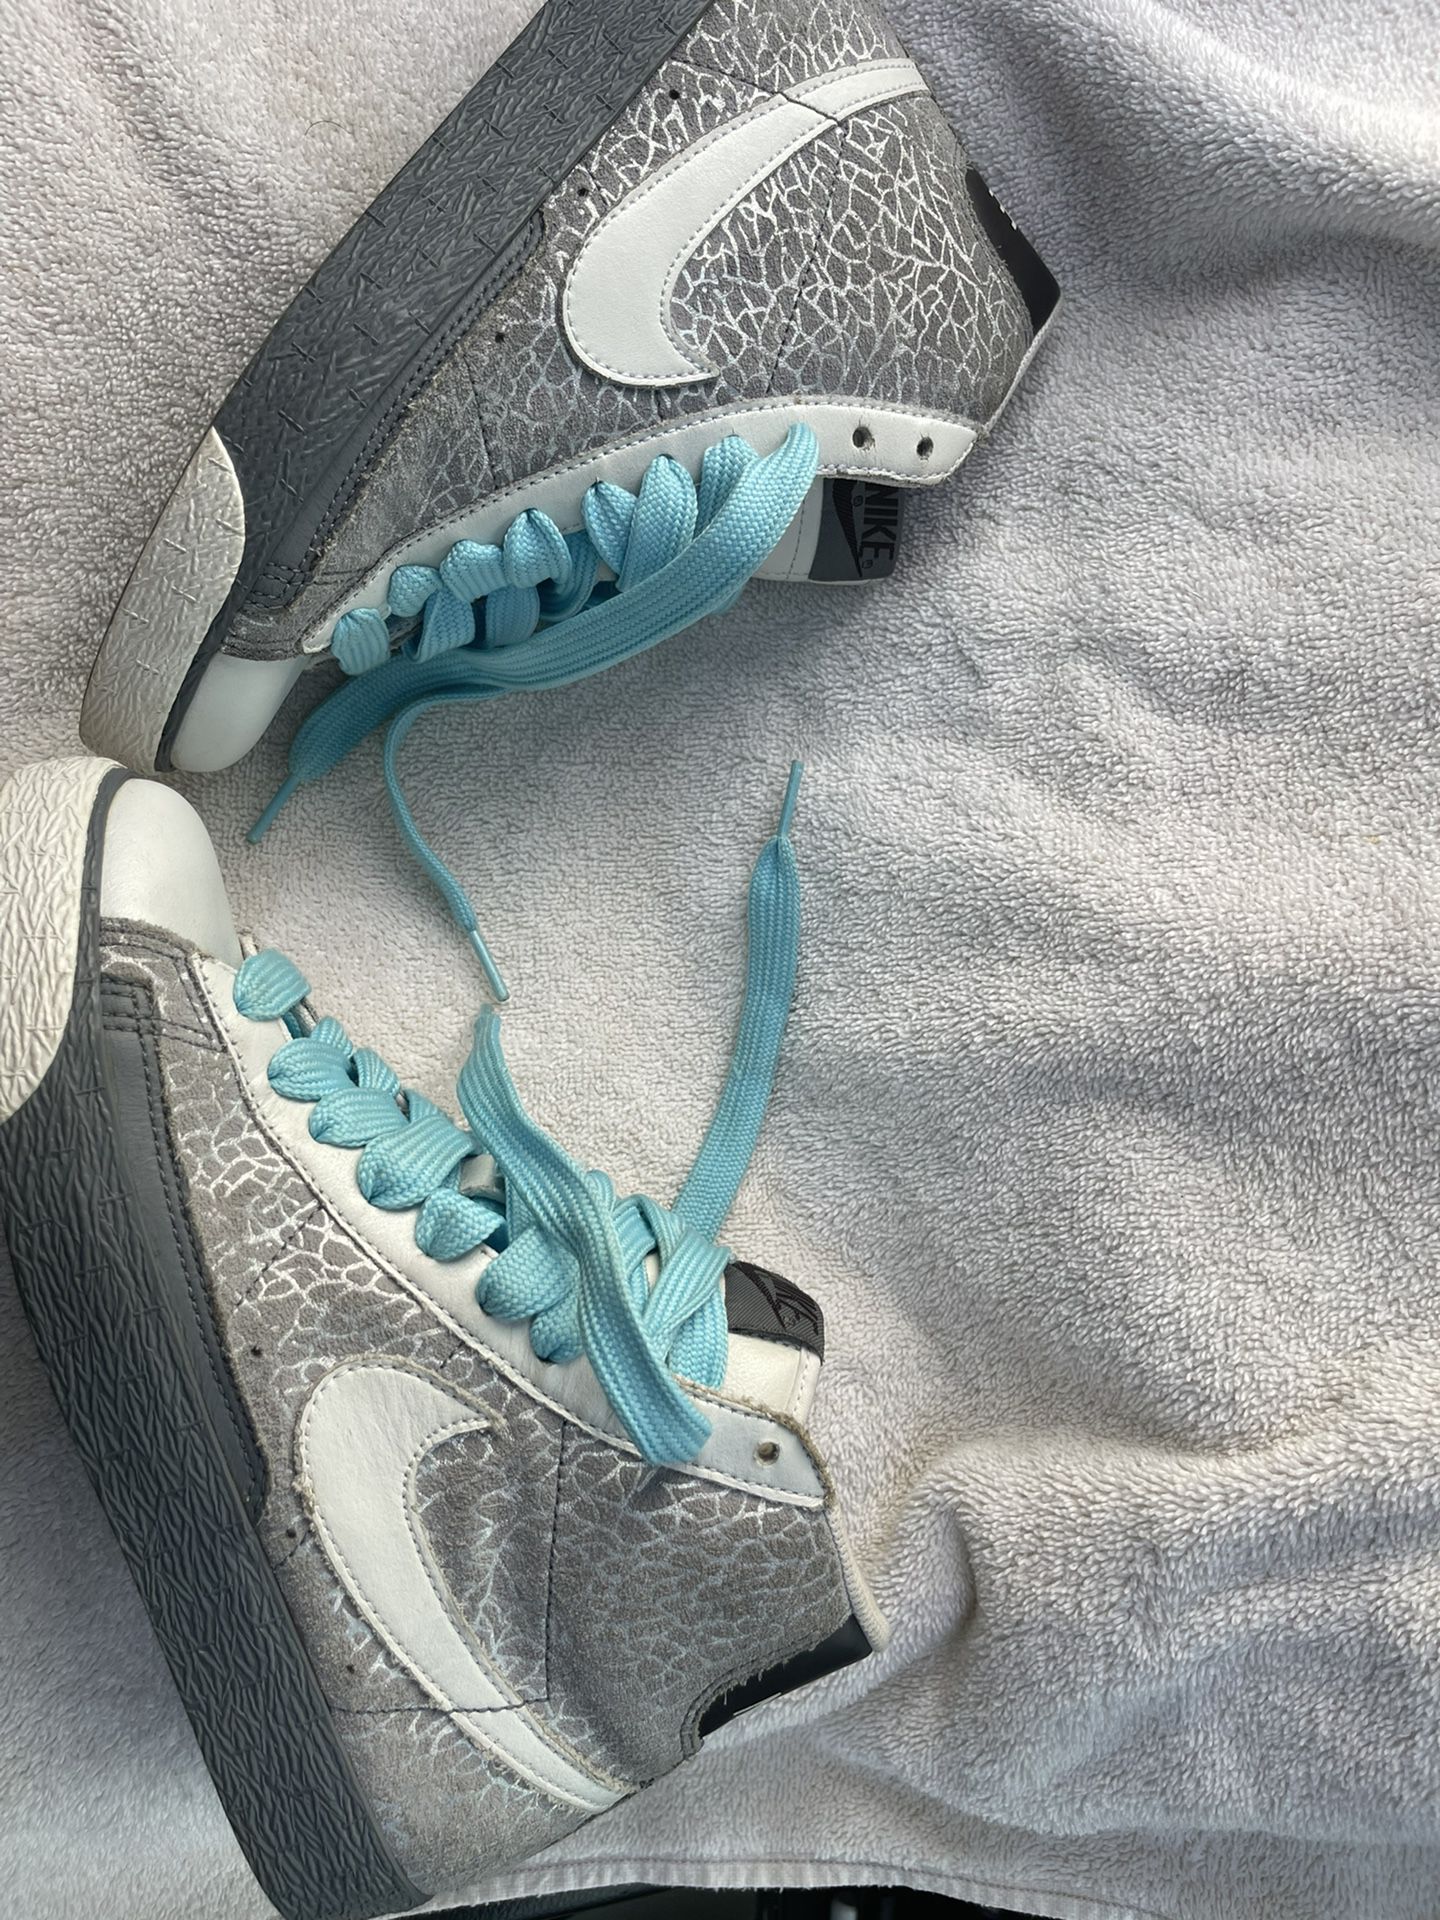 Women’s High Top Size 6 Nike Shoes Teal + Pearl White 